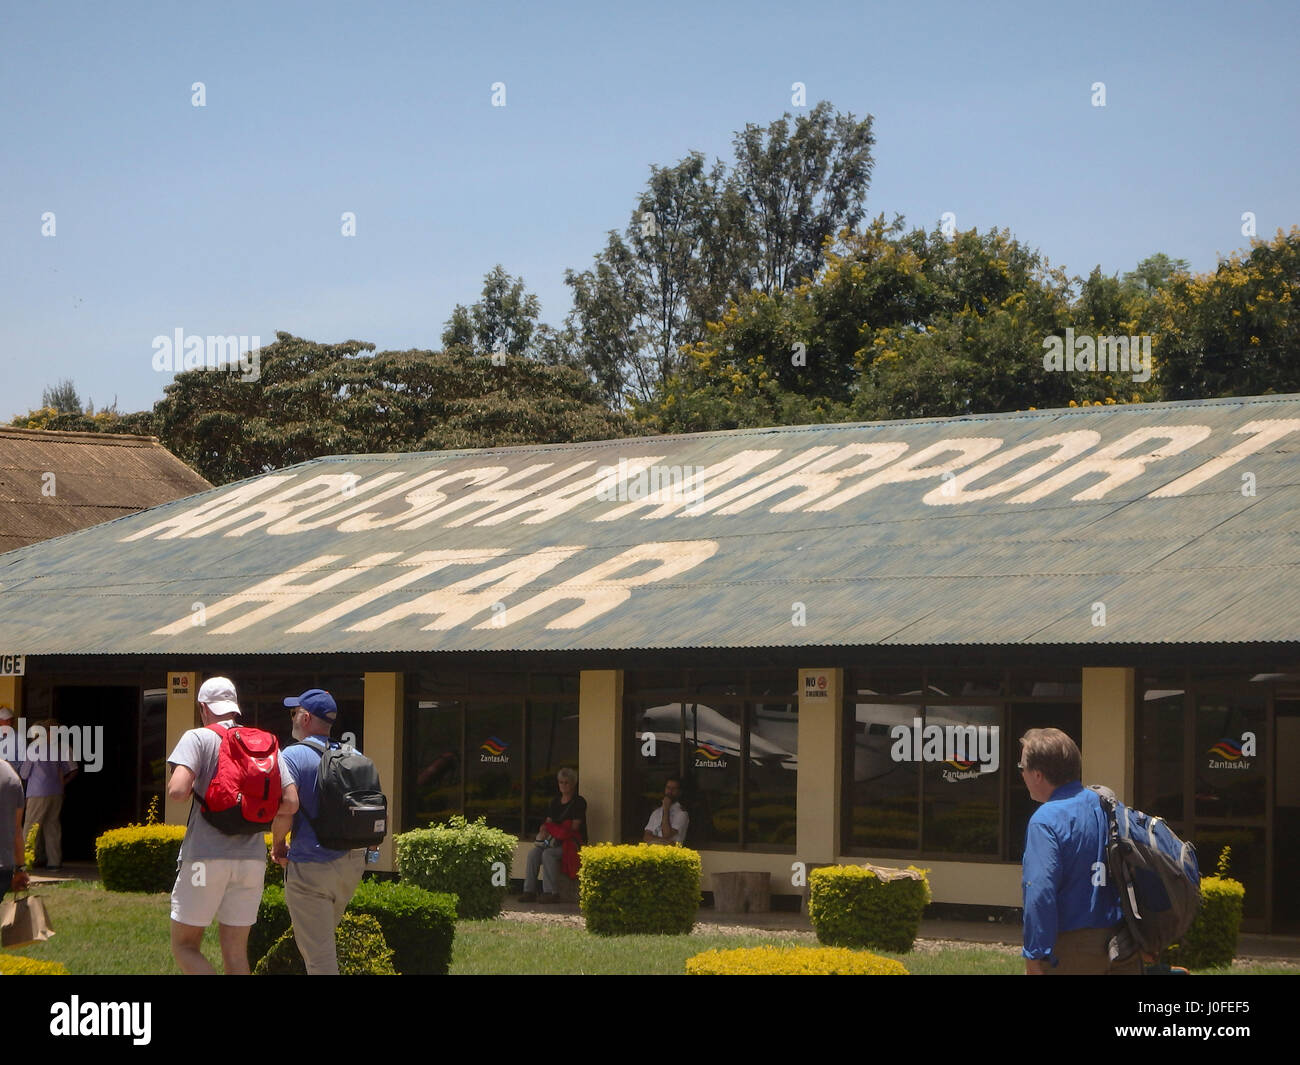 Arusha, Tanzania - March 12, 2017 - Arrival terminal at Arusha Airport in Tanzania, Africa. Stock Photo